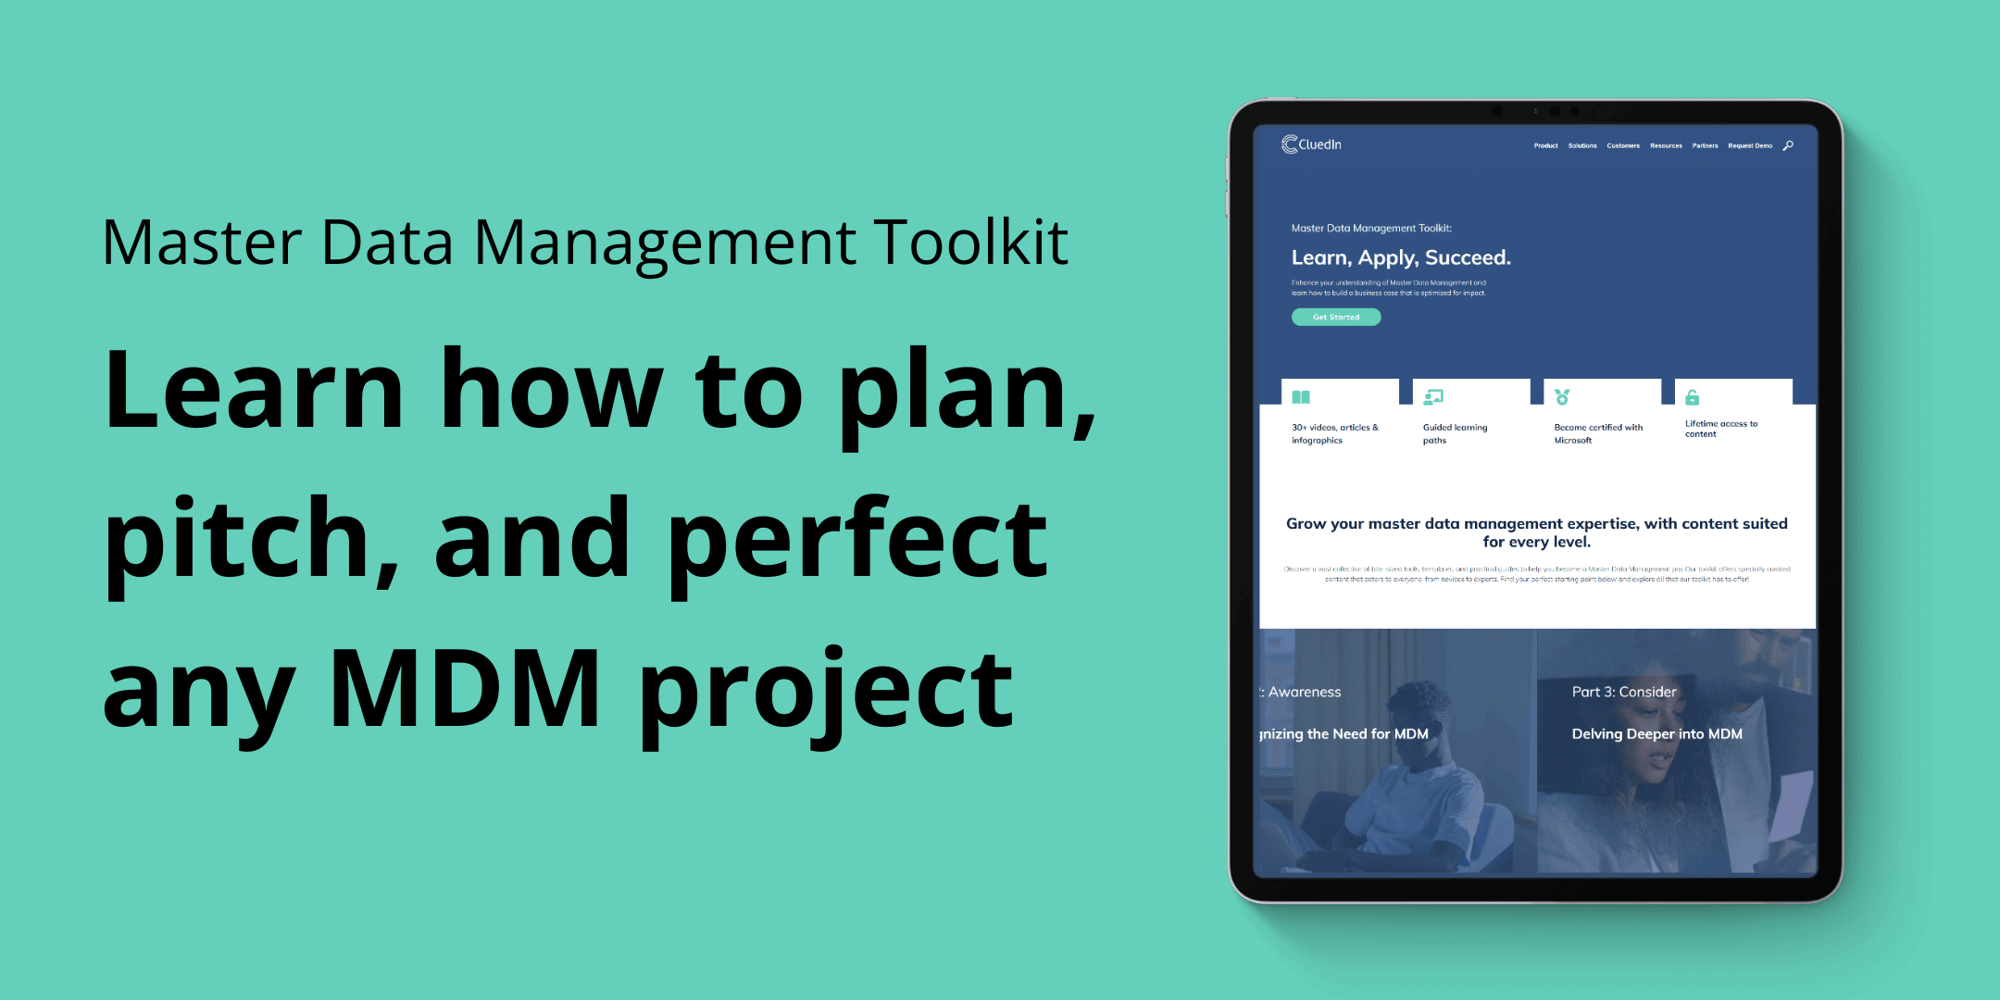 CluedIn MDM Toolkit - learn how to pitch, plan and perfect any MDM project